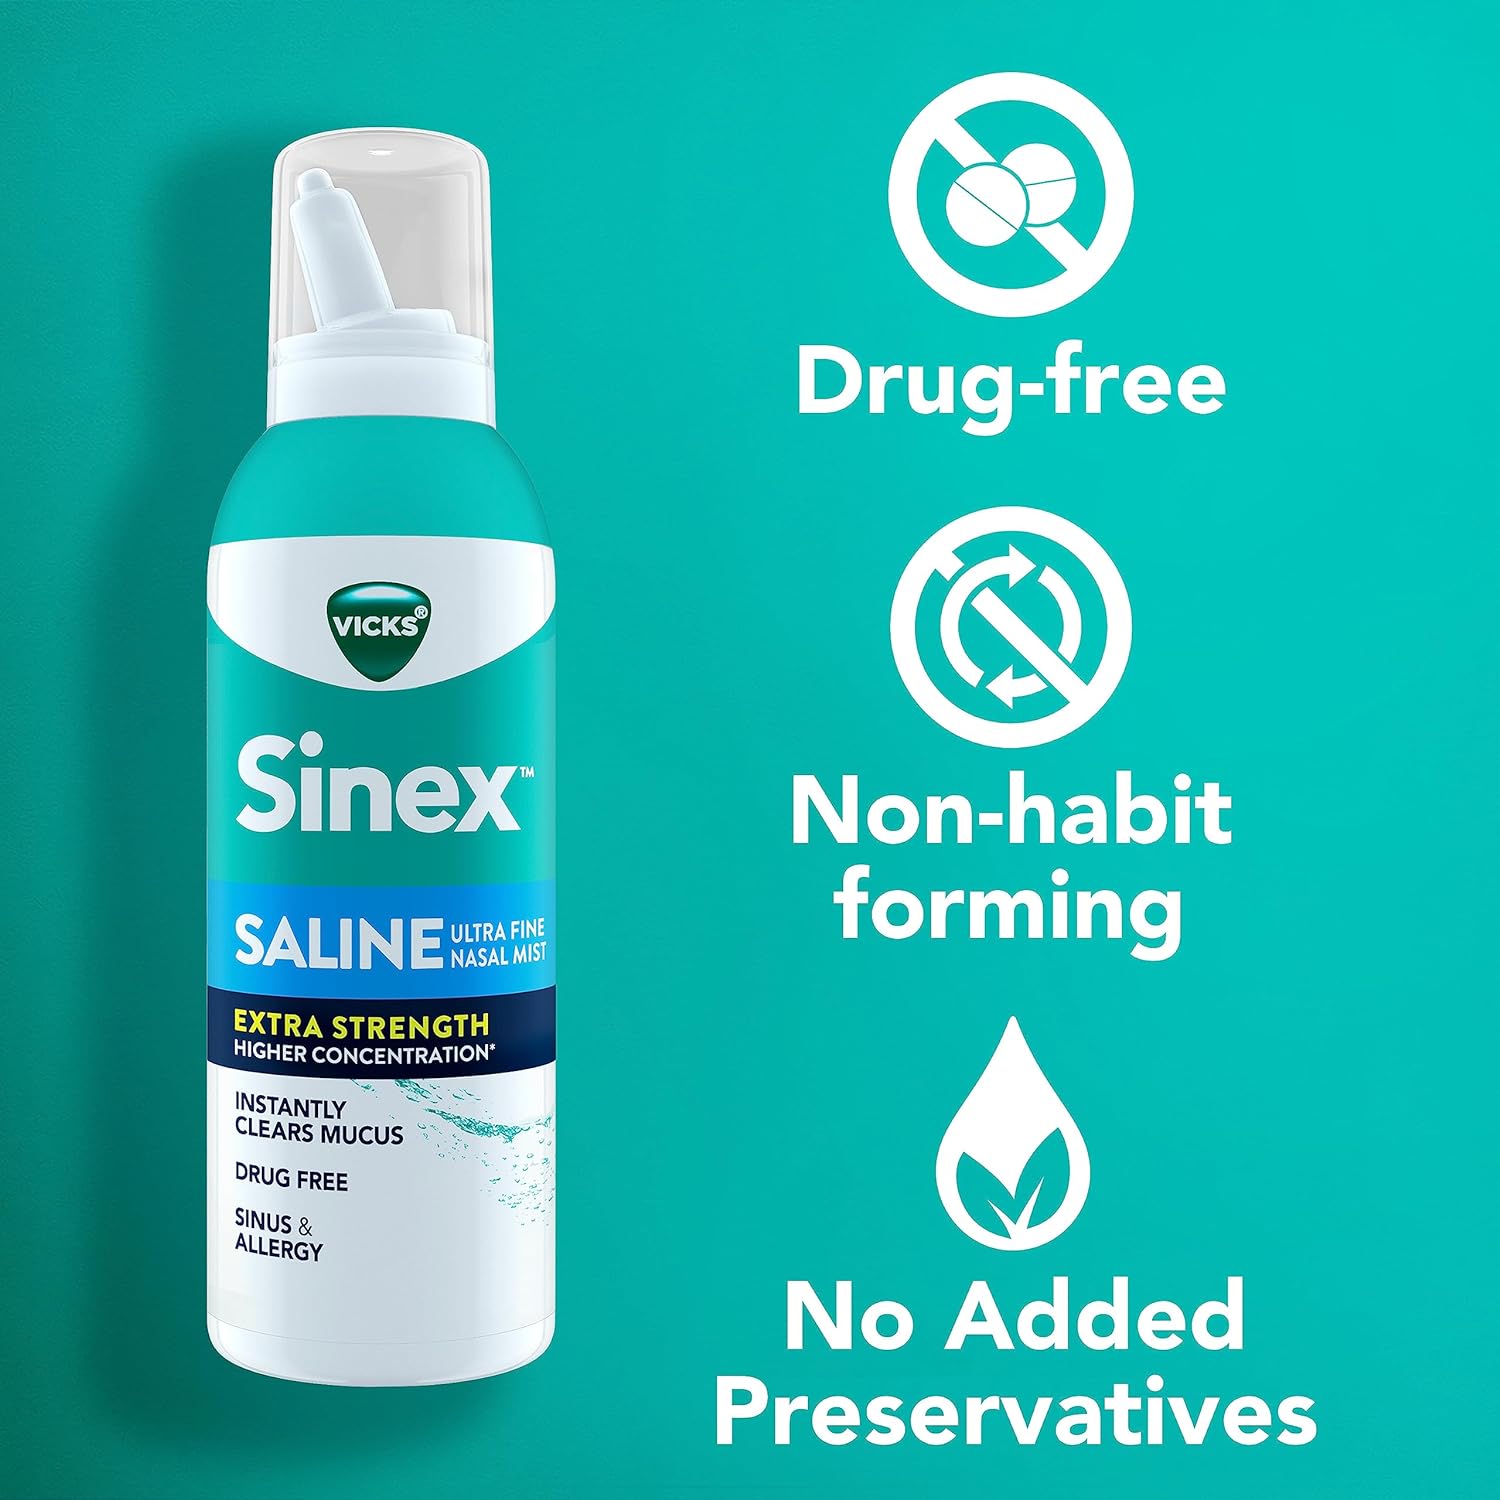 VICKS Sinex Saline Extra Strength Nasal Spray, 3X Concentrated* Drug Free Ultra Fine Mist, Instantly Clears Mucus, Ultra Concentrated to Clear Congestion Fast, Safe For Daily Use, 5 OZ x 2 : Health & Household